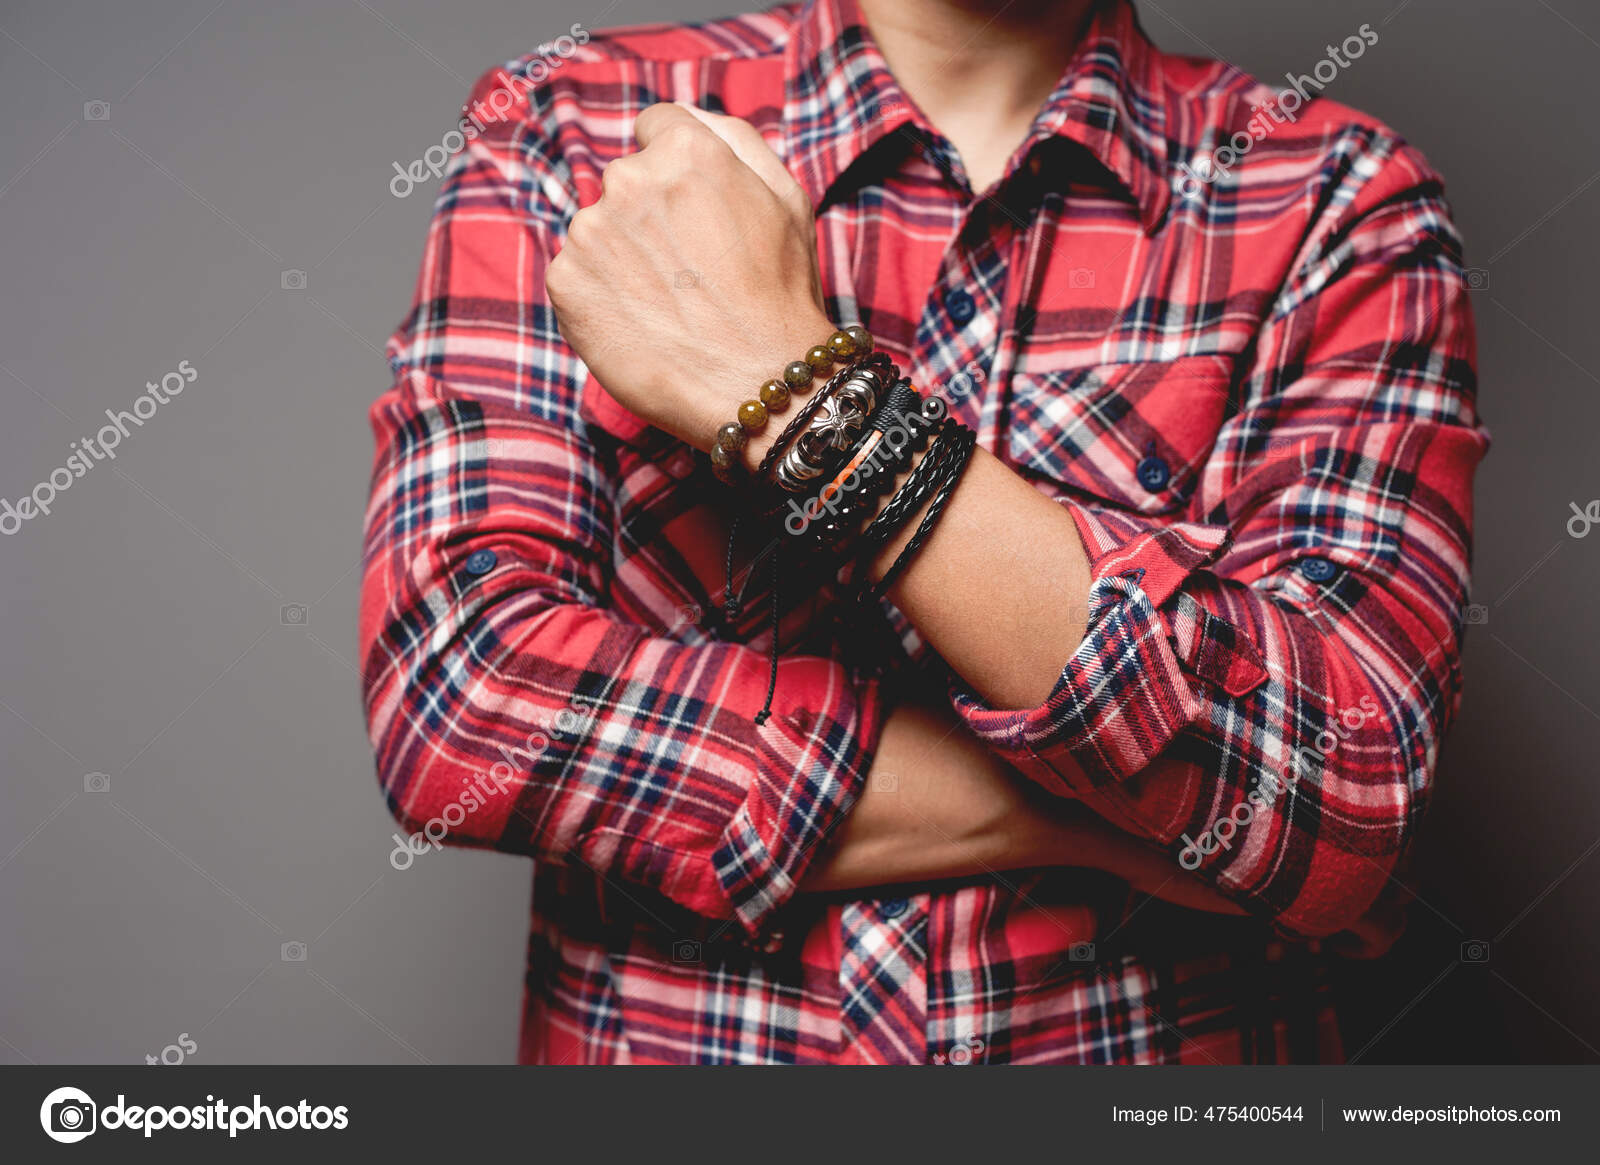 Great Reasons Why Bracelets Are an Essential Accessory for Men